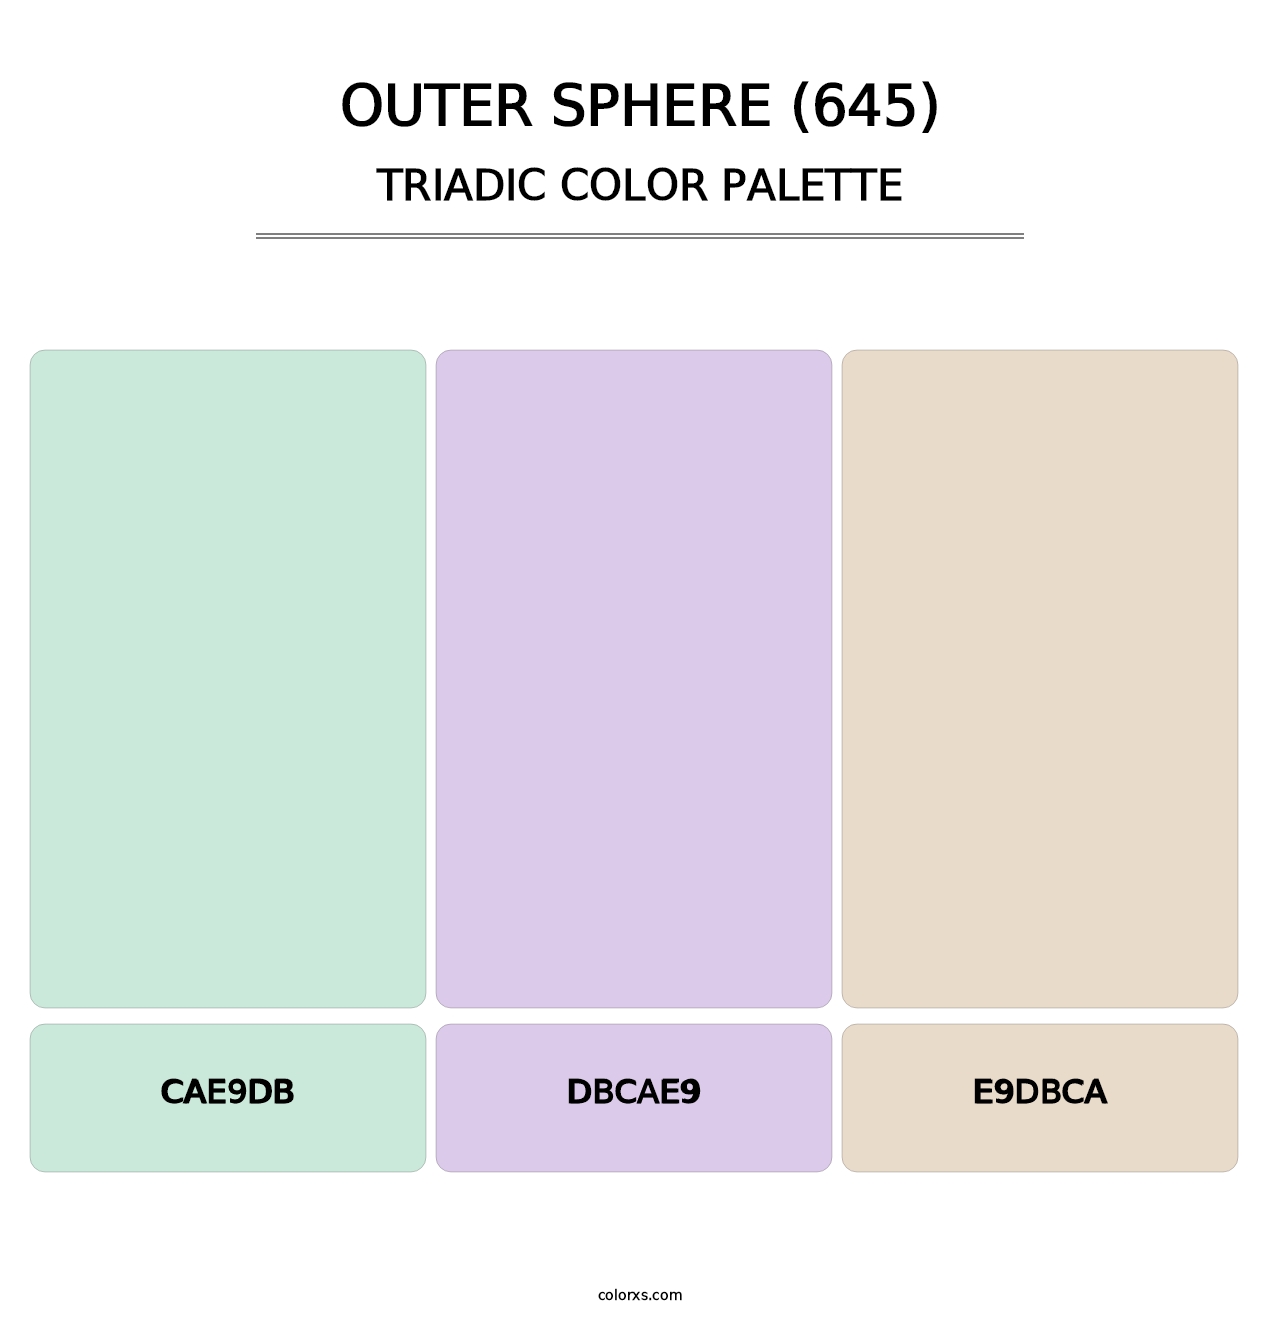 Outer Sphere (645) - Triadic Color Palette